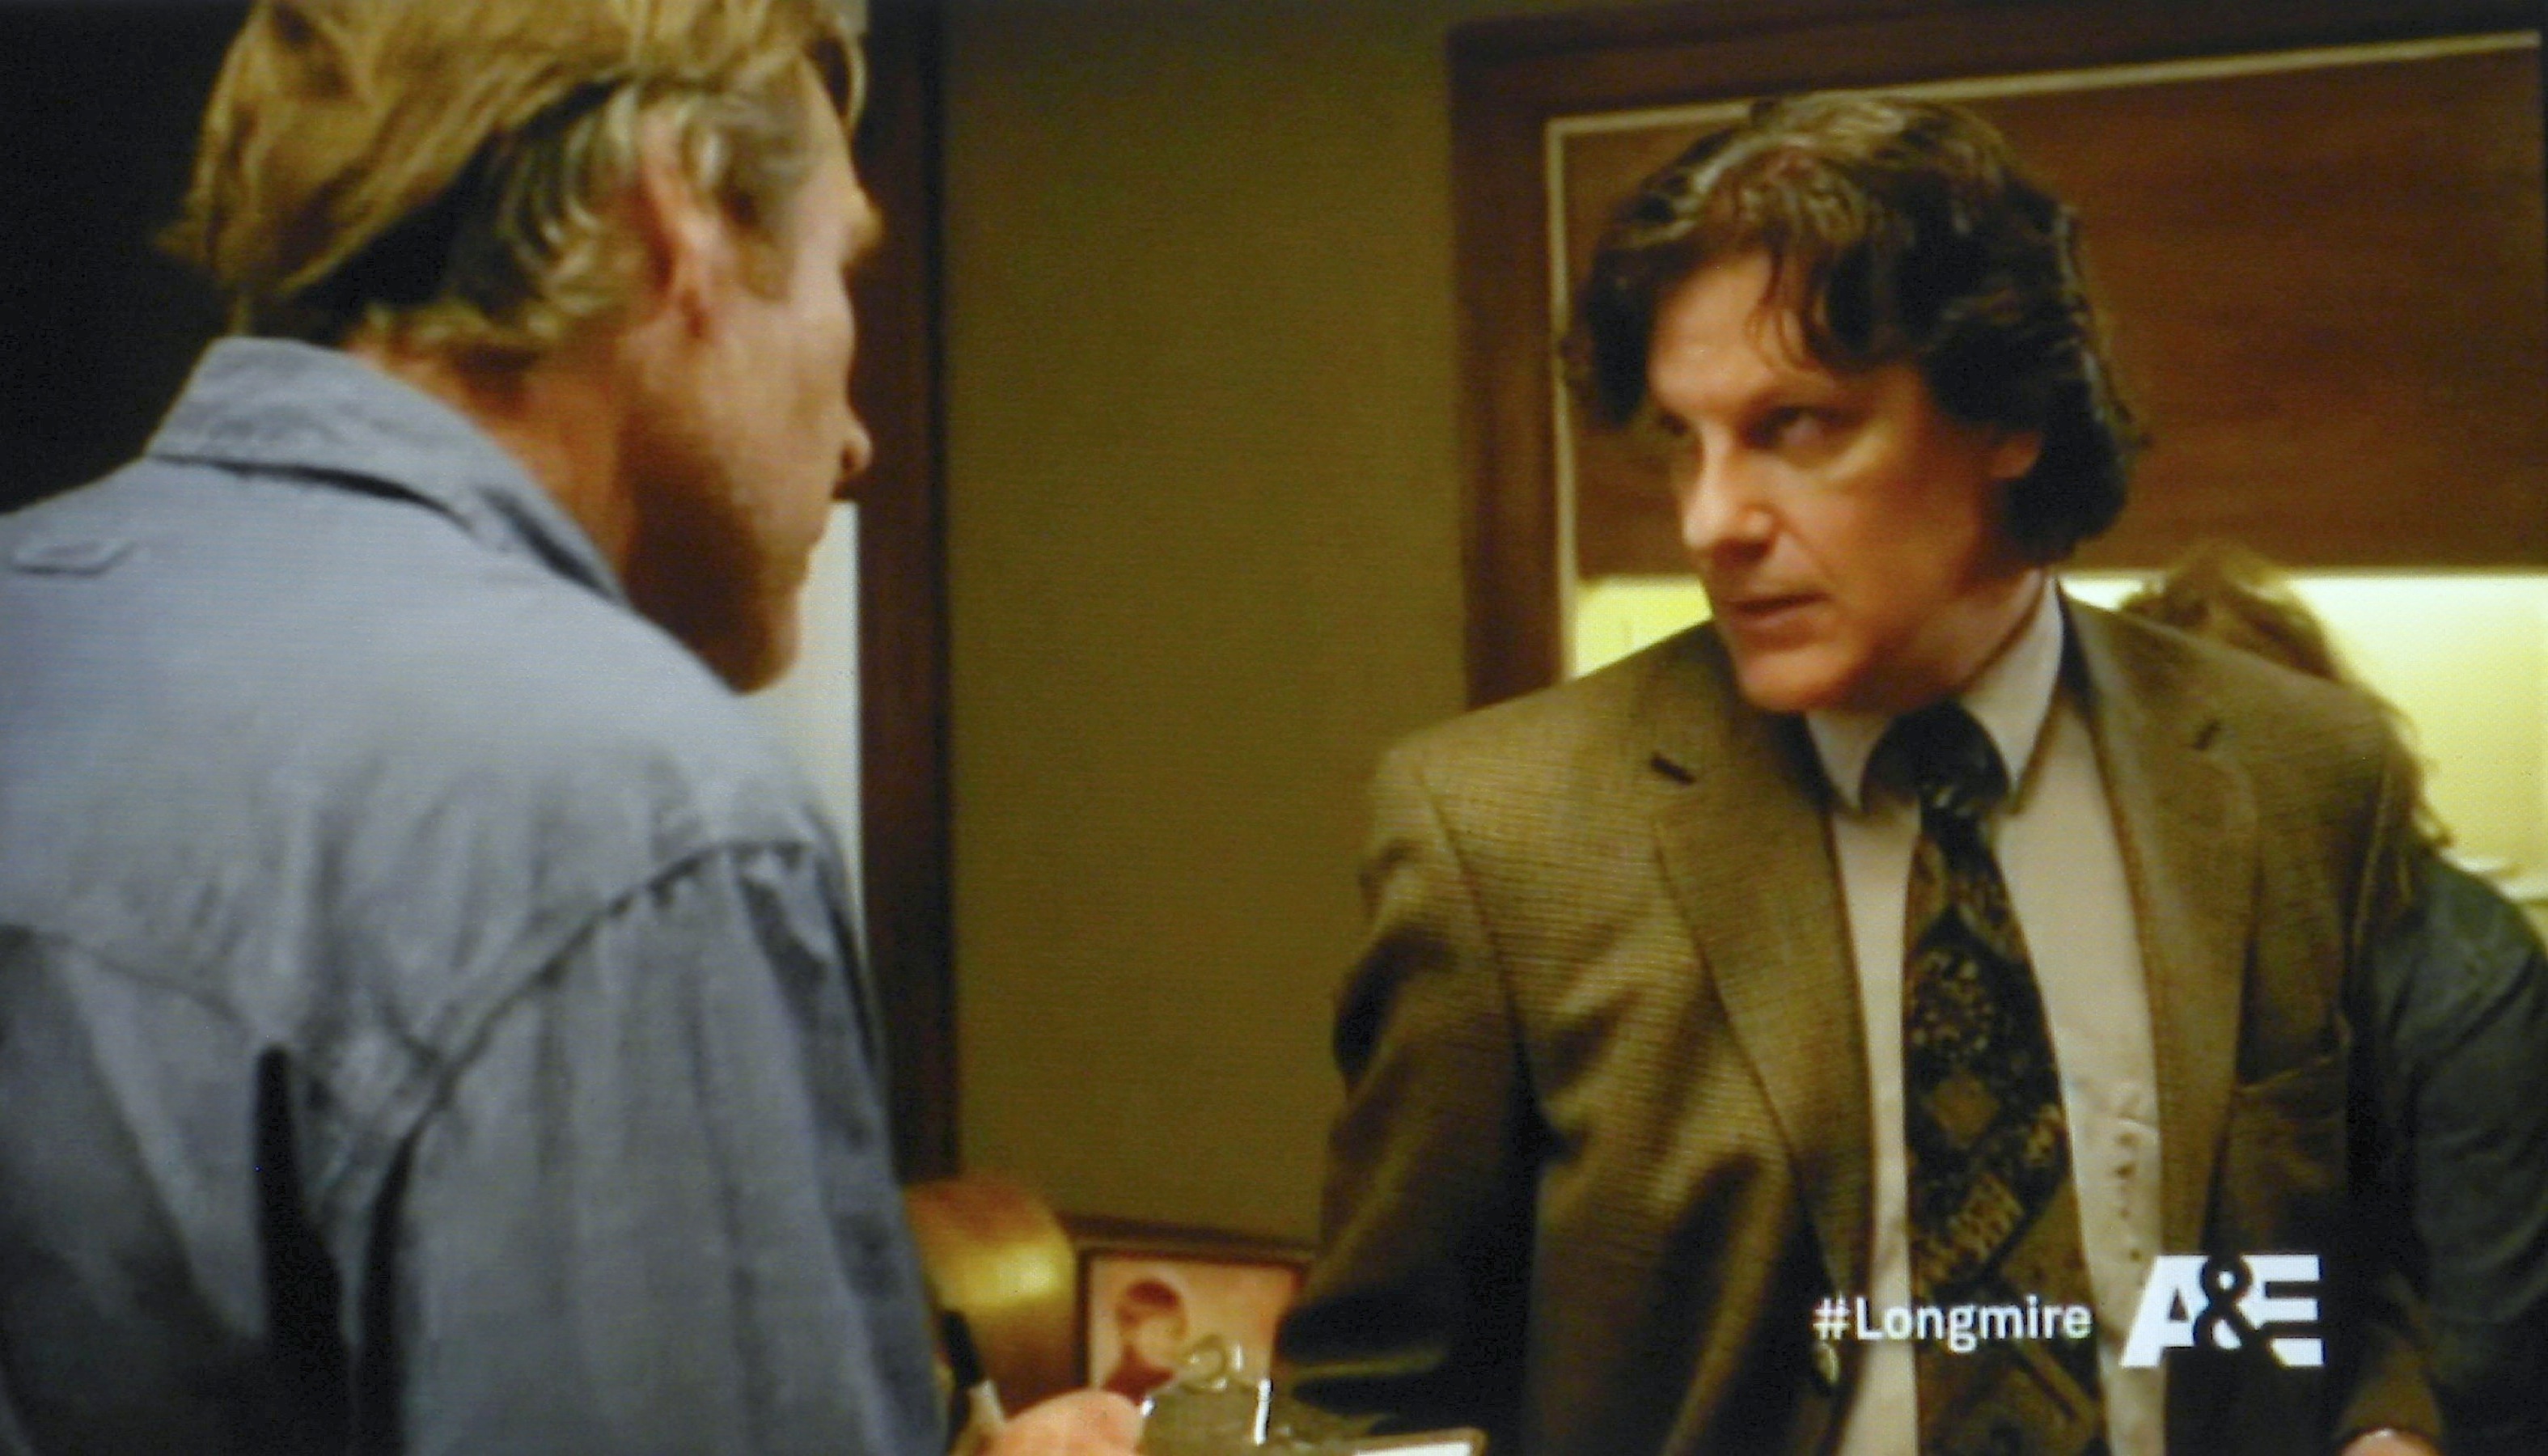 as Phil Capps in LONGMIRE, with Robert Taylor